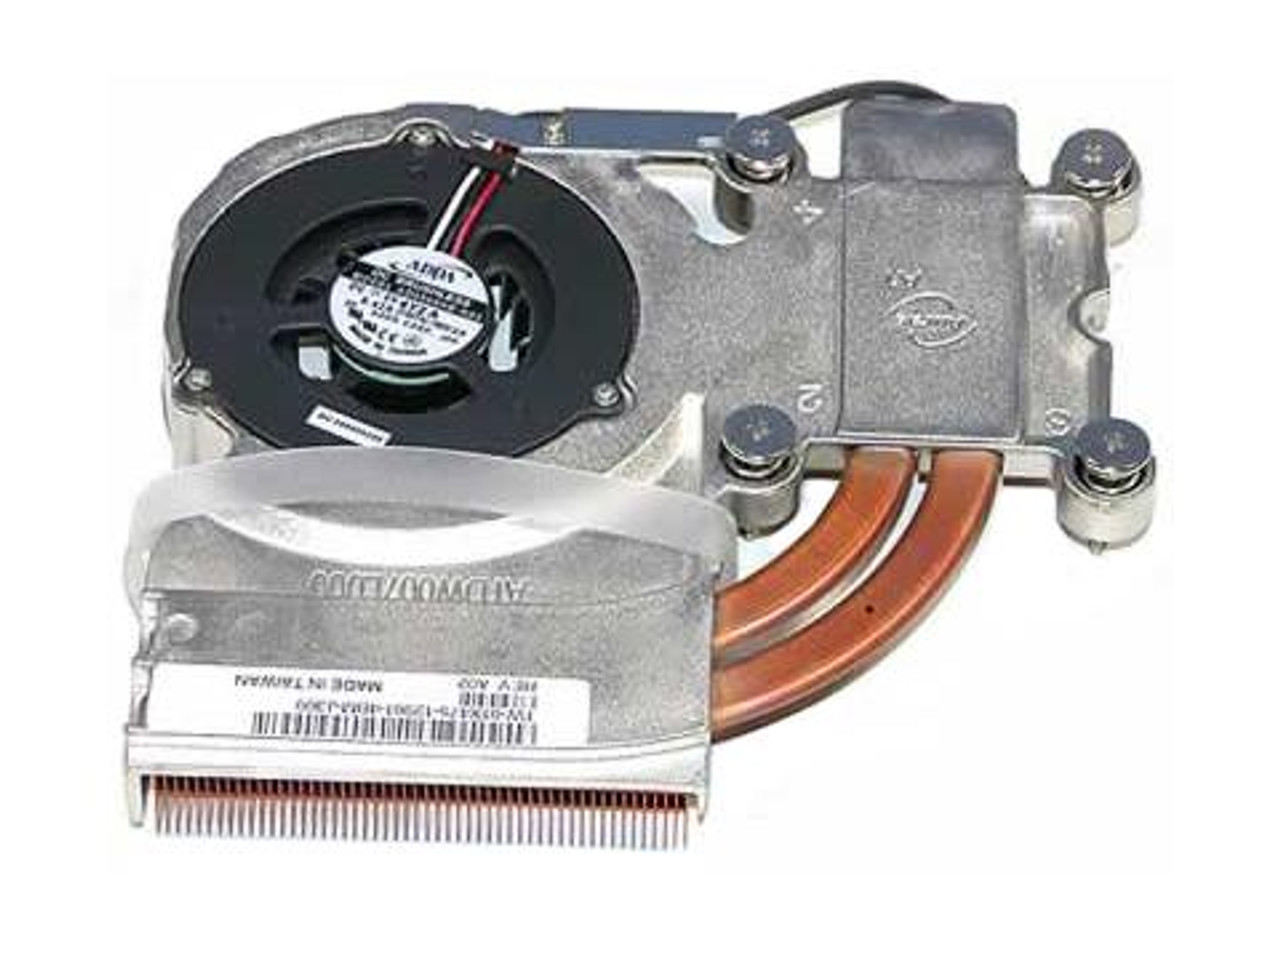 1X475 Dell CPU Fan With Heatsink Assembly for Inspiron 1100 1150 5100